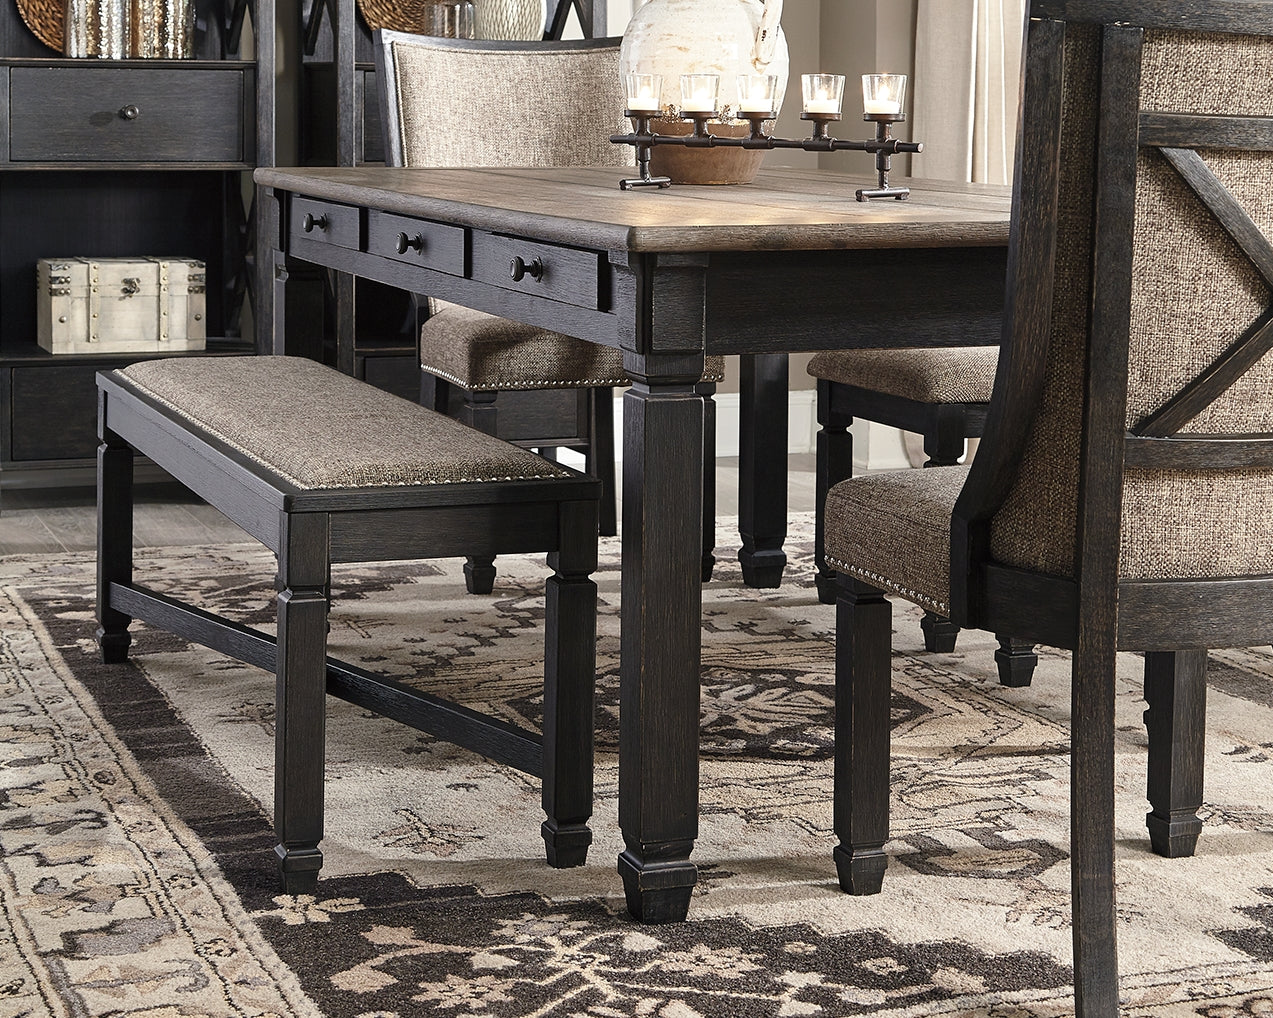 Tyler Creek Black/Grayish Brown Dining Table and 4 Chairs with Bench